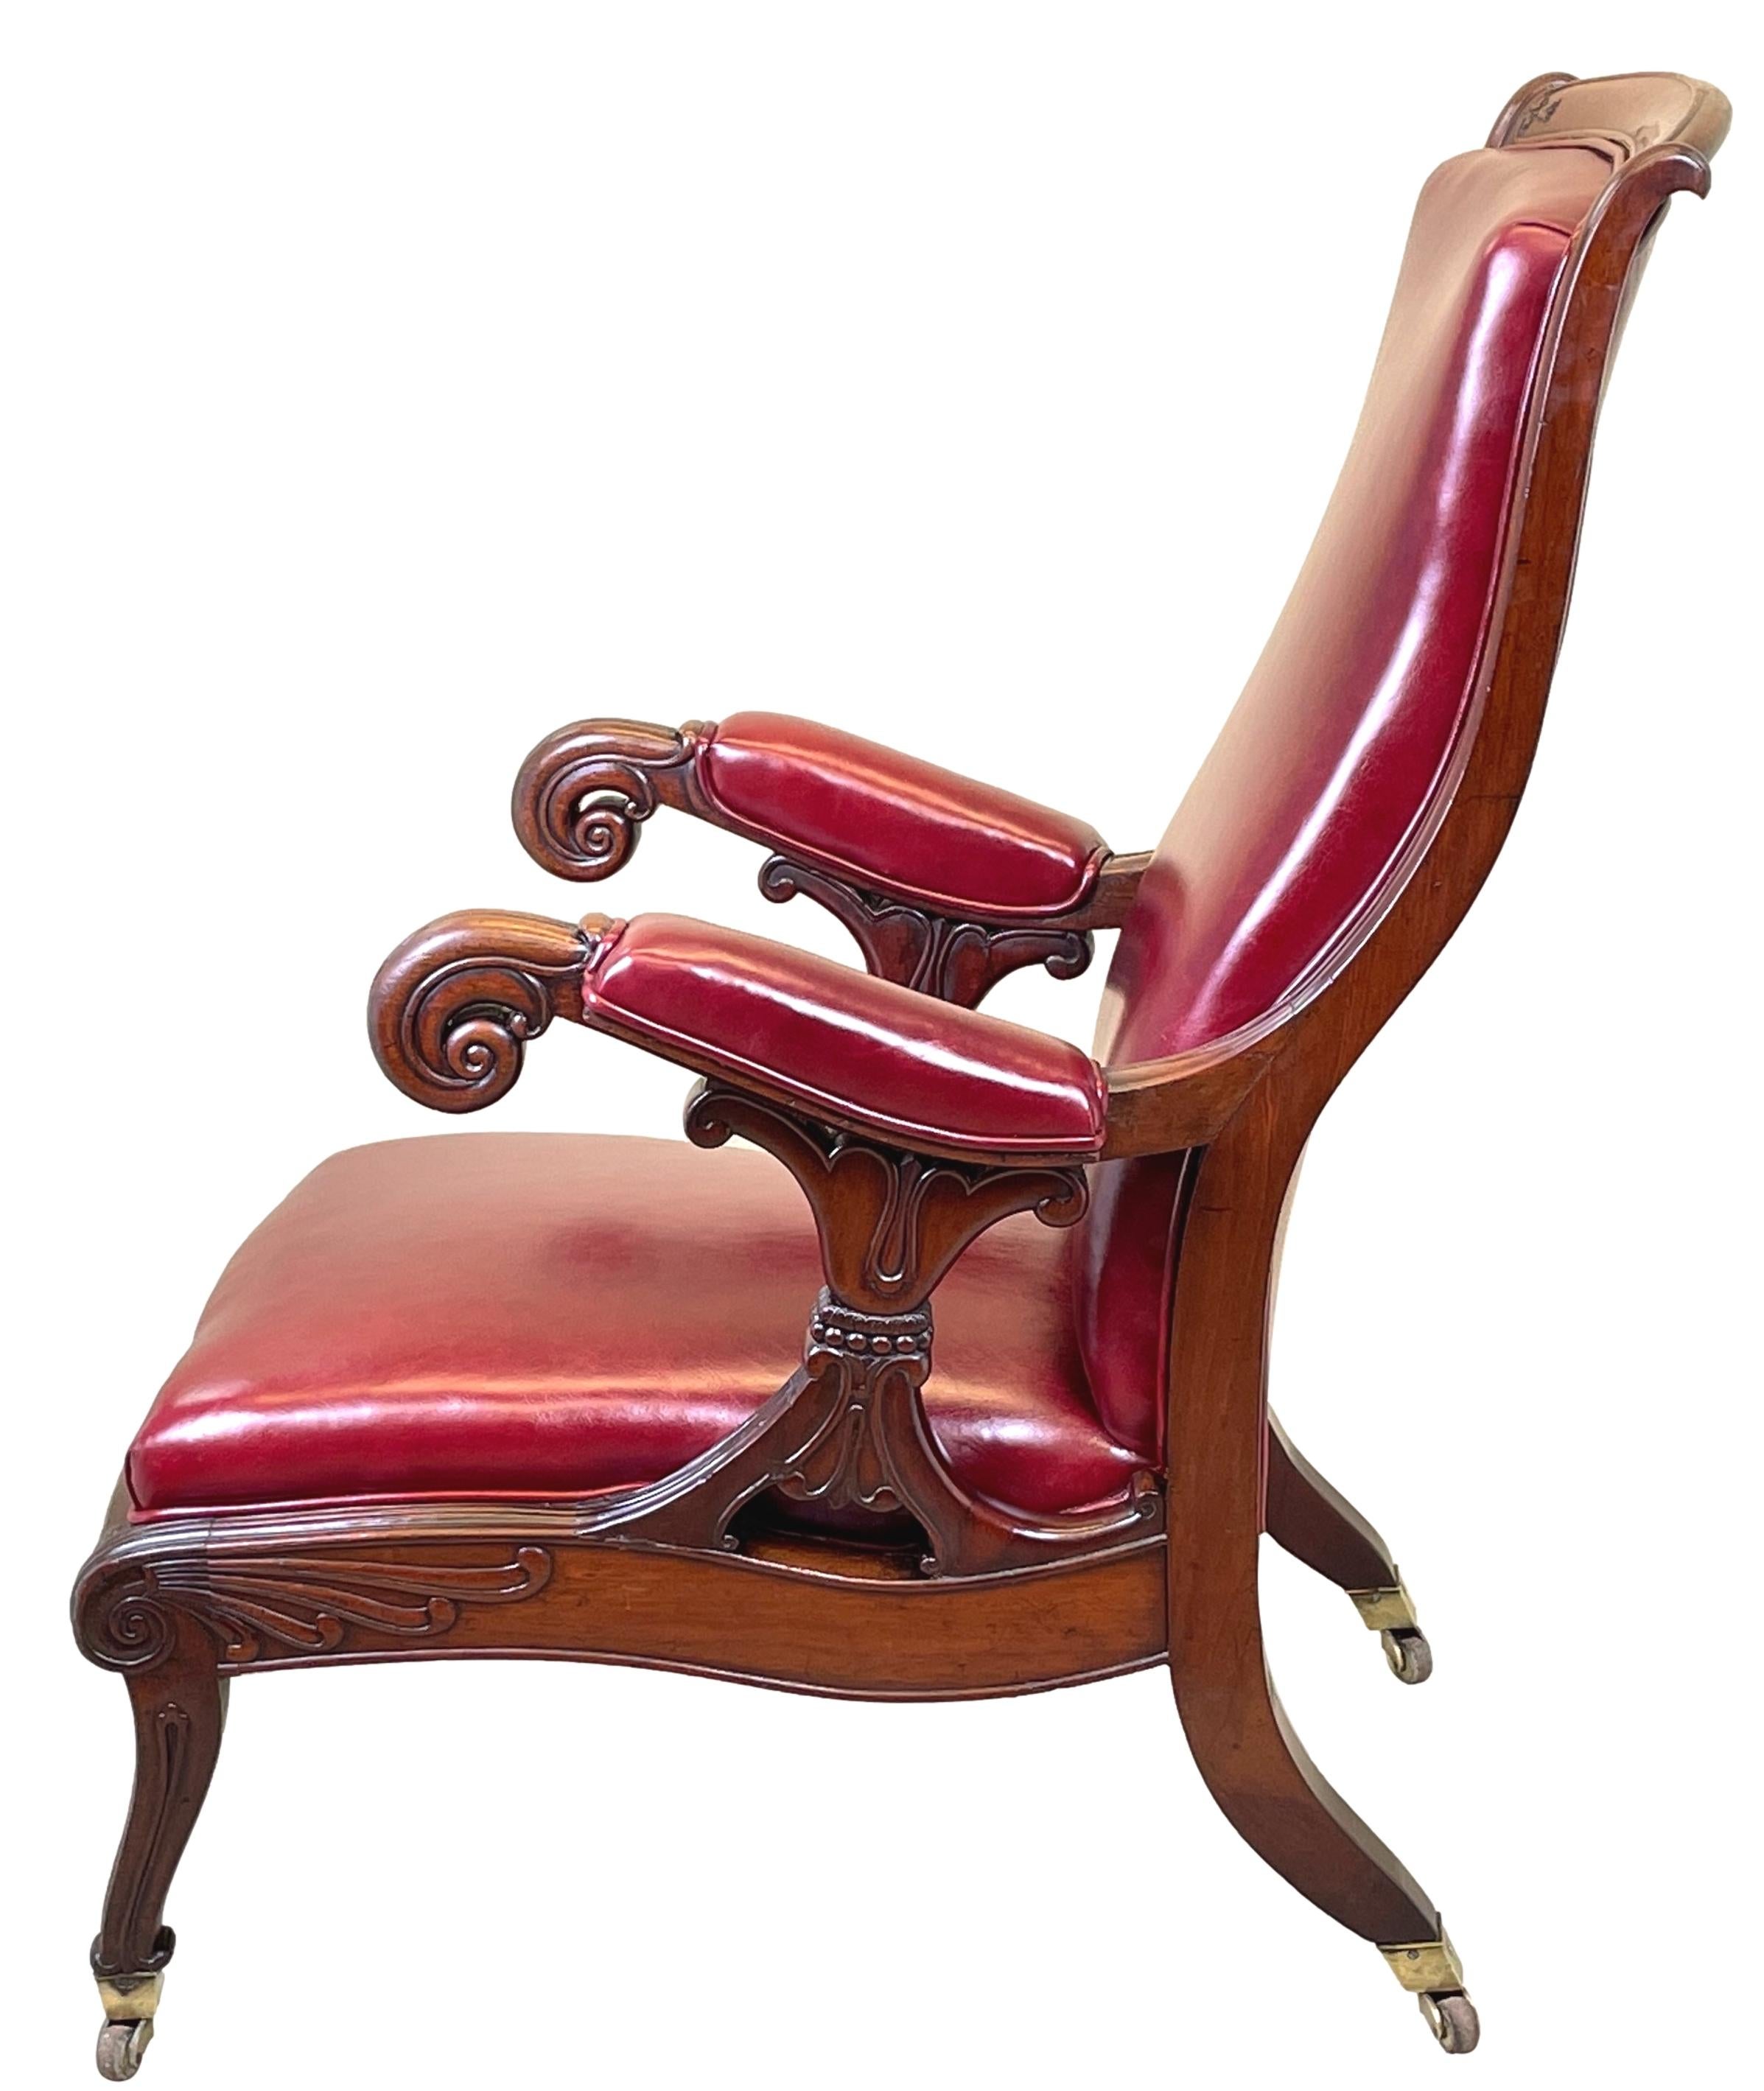 A superb quality mid-19th century William IV period mahogany library armchair of bold proportions having swept and scrolling arms with superbly carved x framed supports, over large bucket seat raised on extremely elegant sabre legs with original